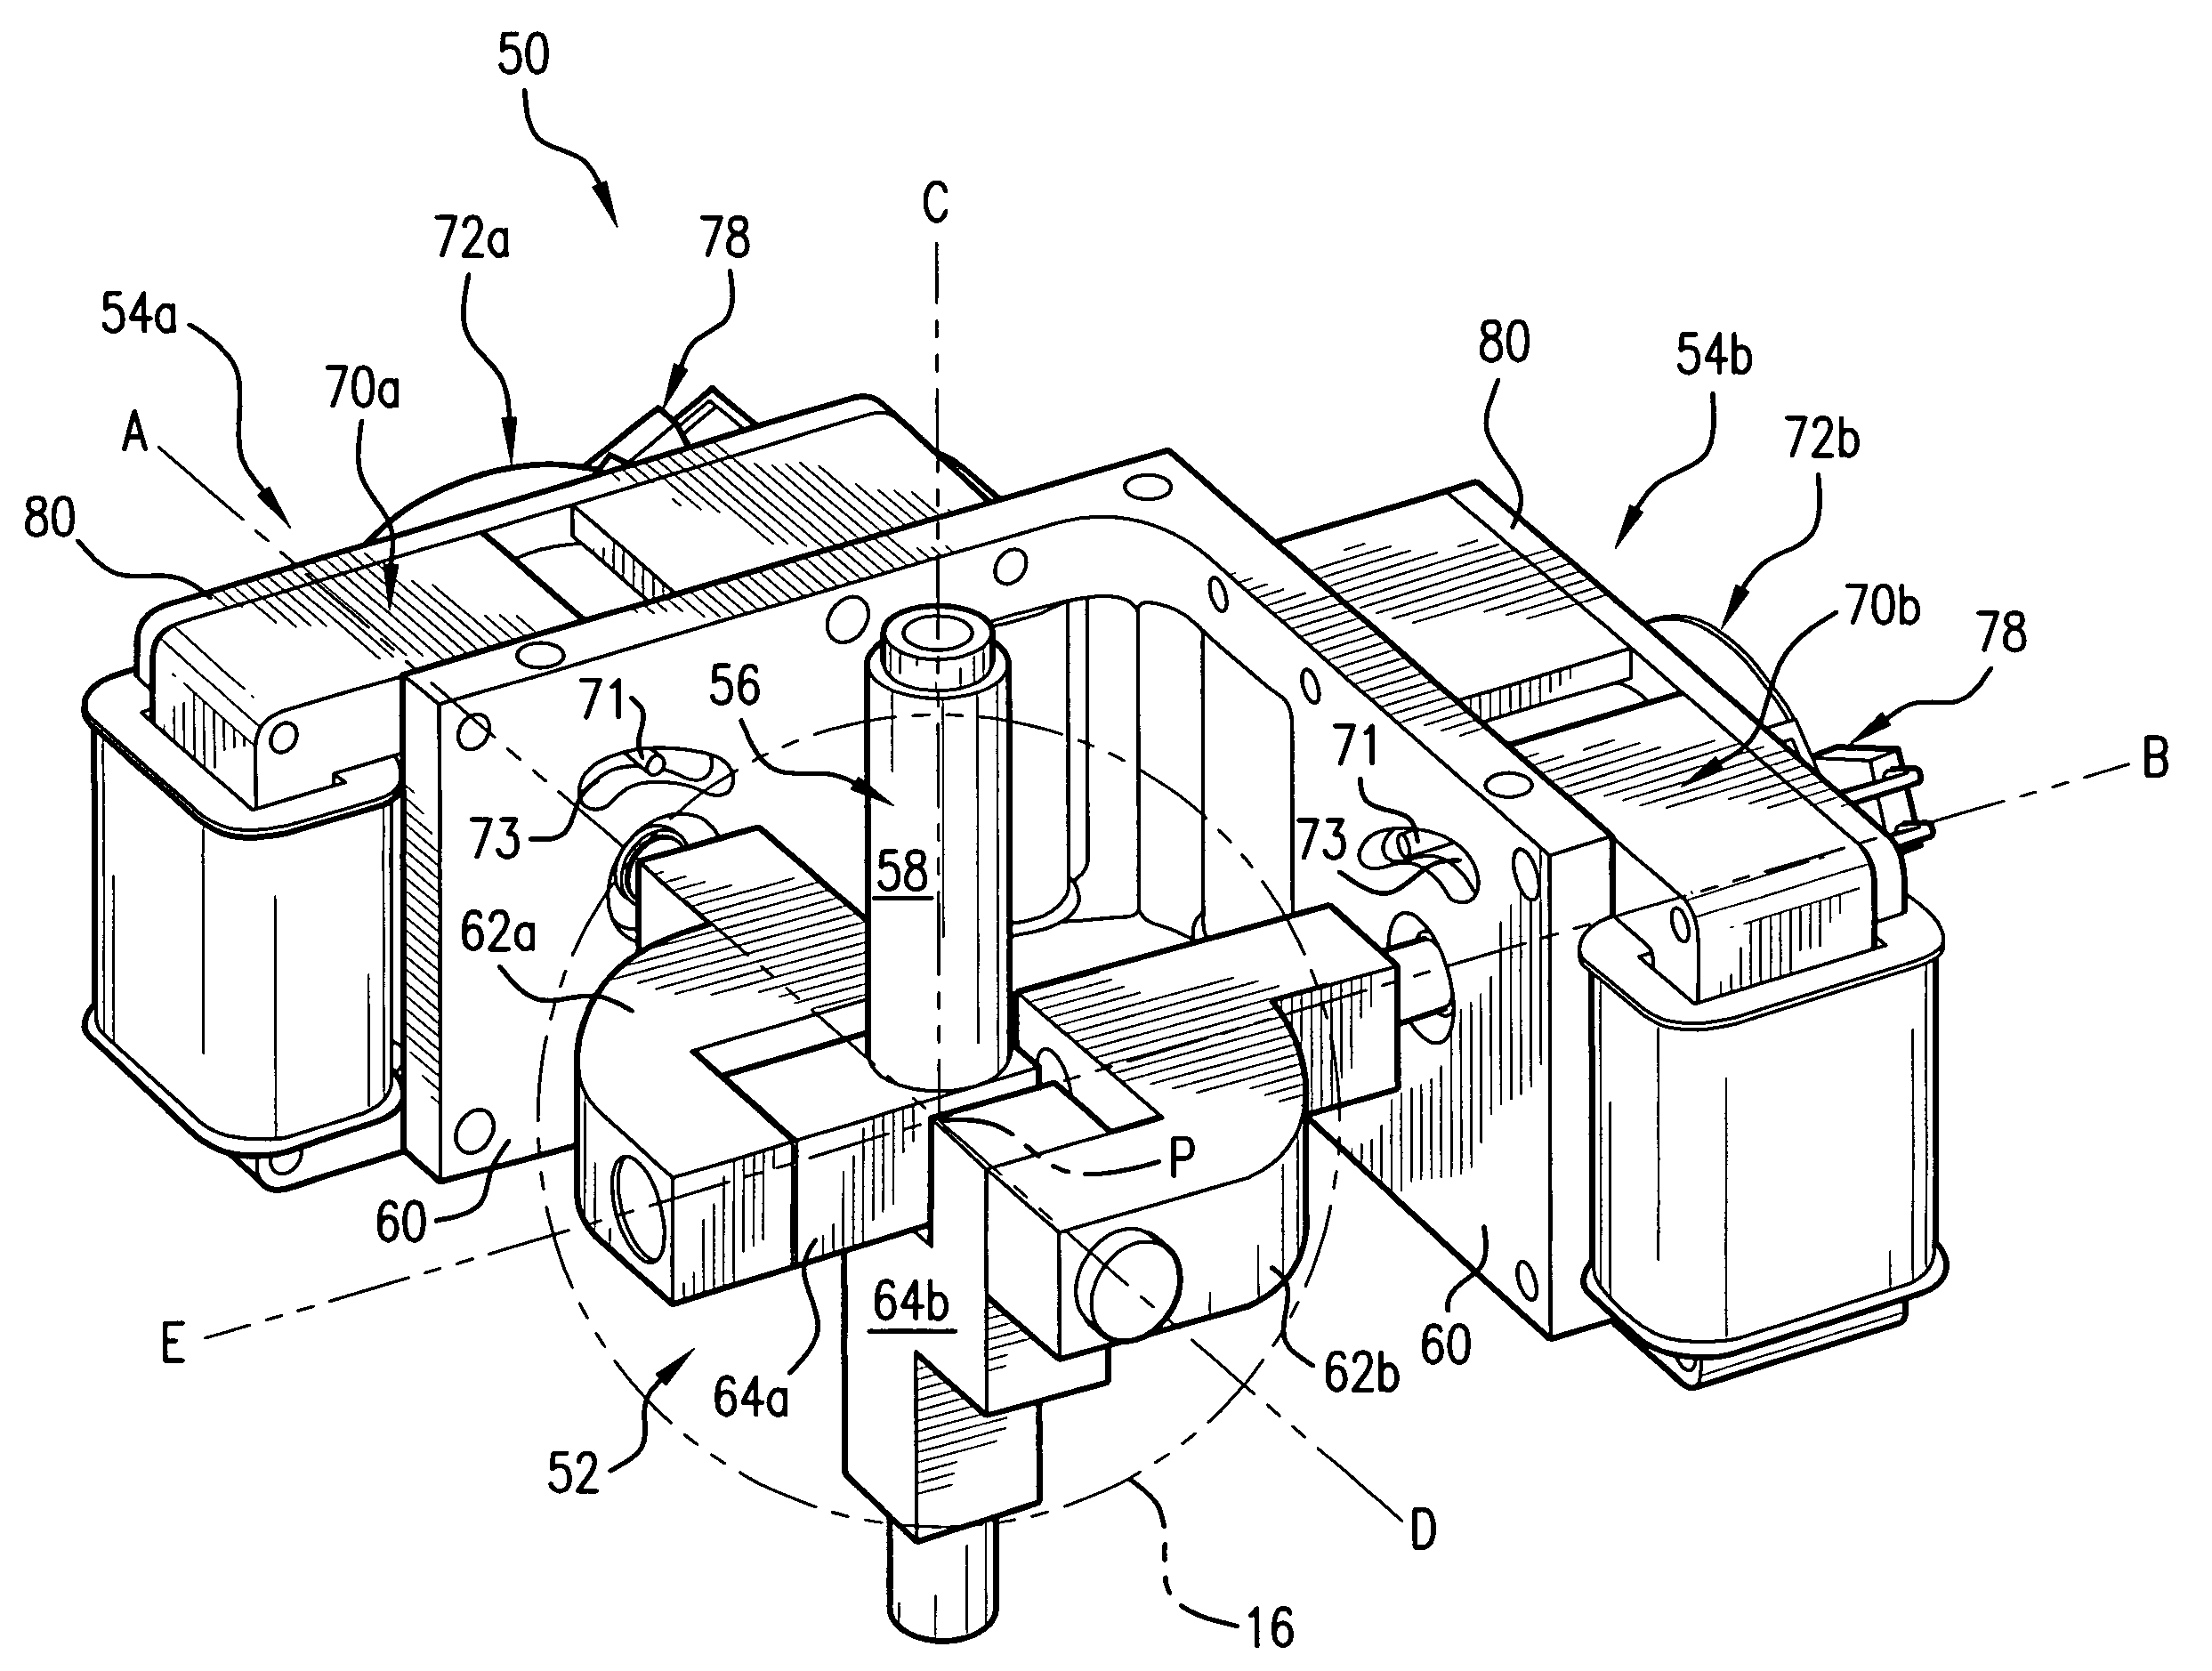 Force feedback device including single-phase, fixed-coil actuators